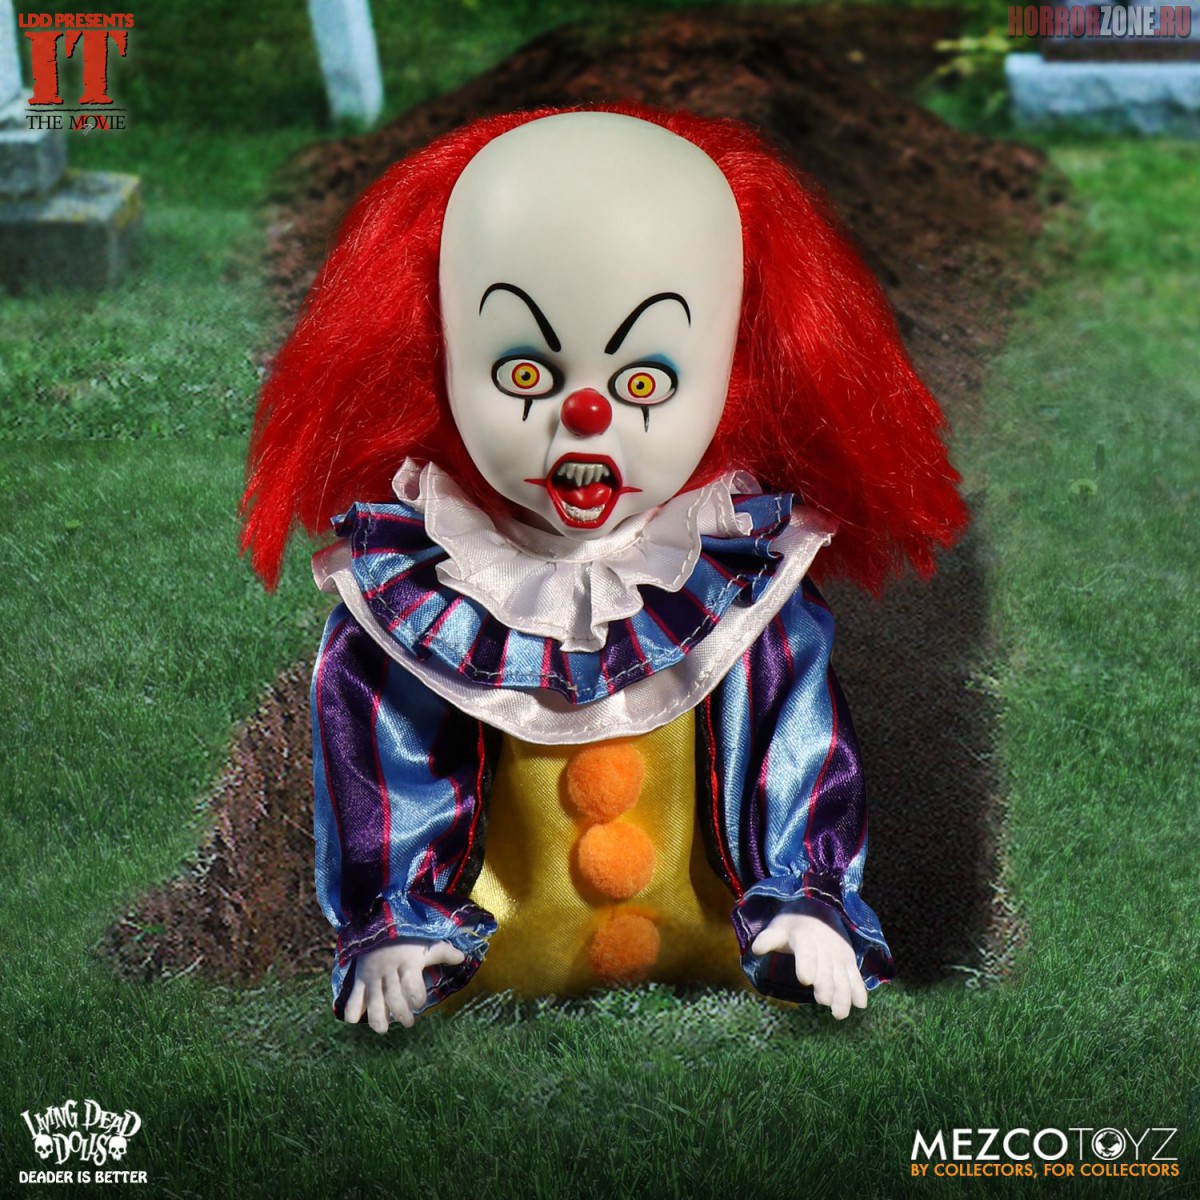 He’s Pennywise the clown, and now he’s a Living Dead Doll